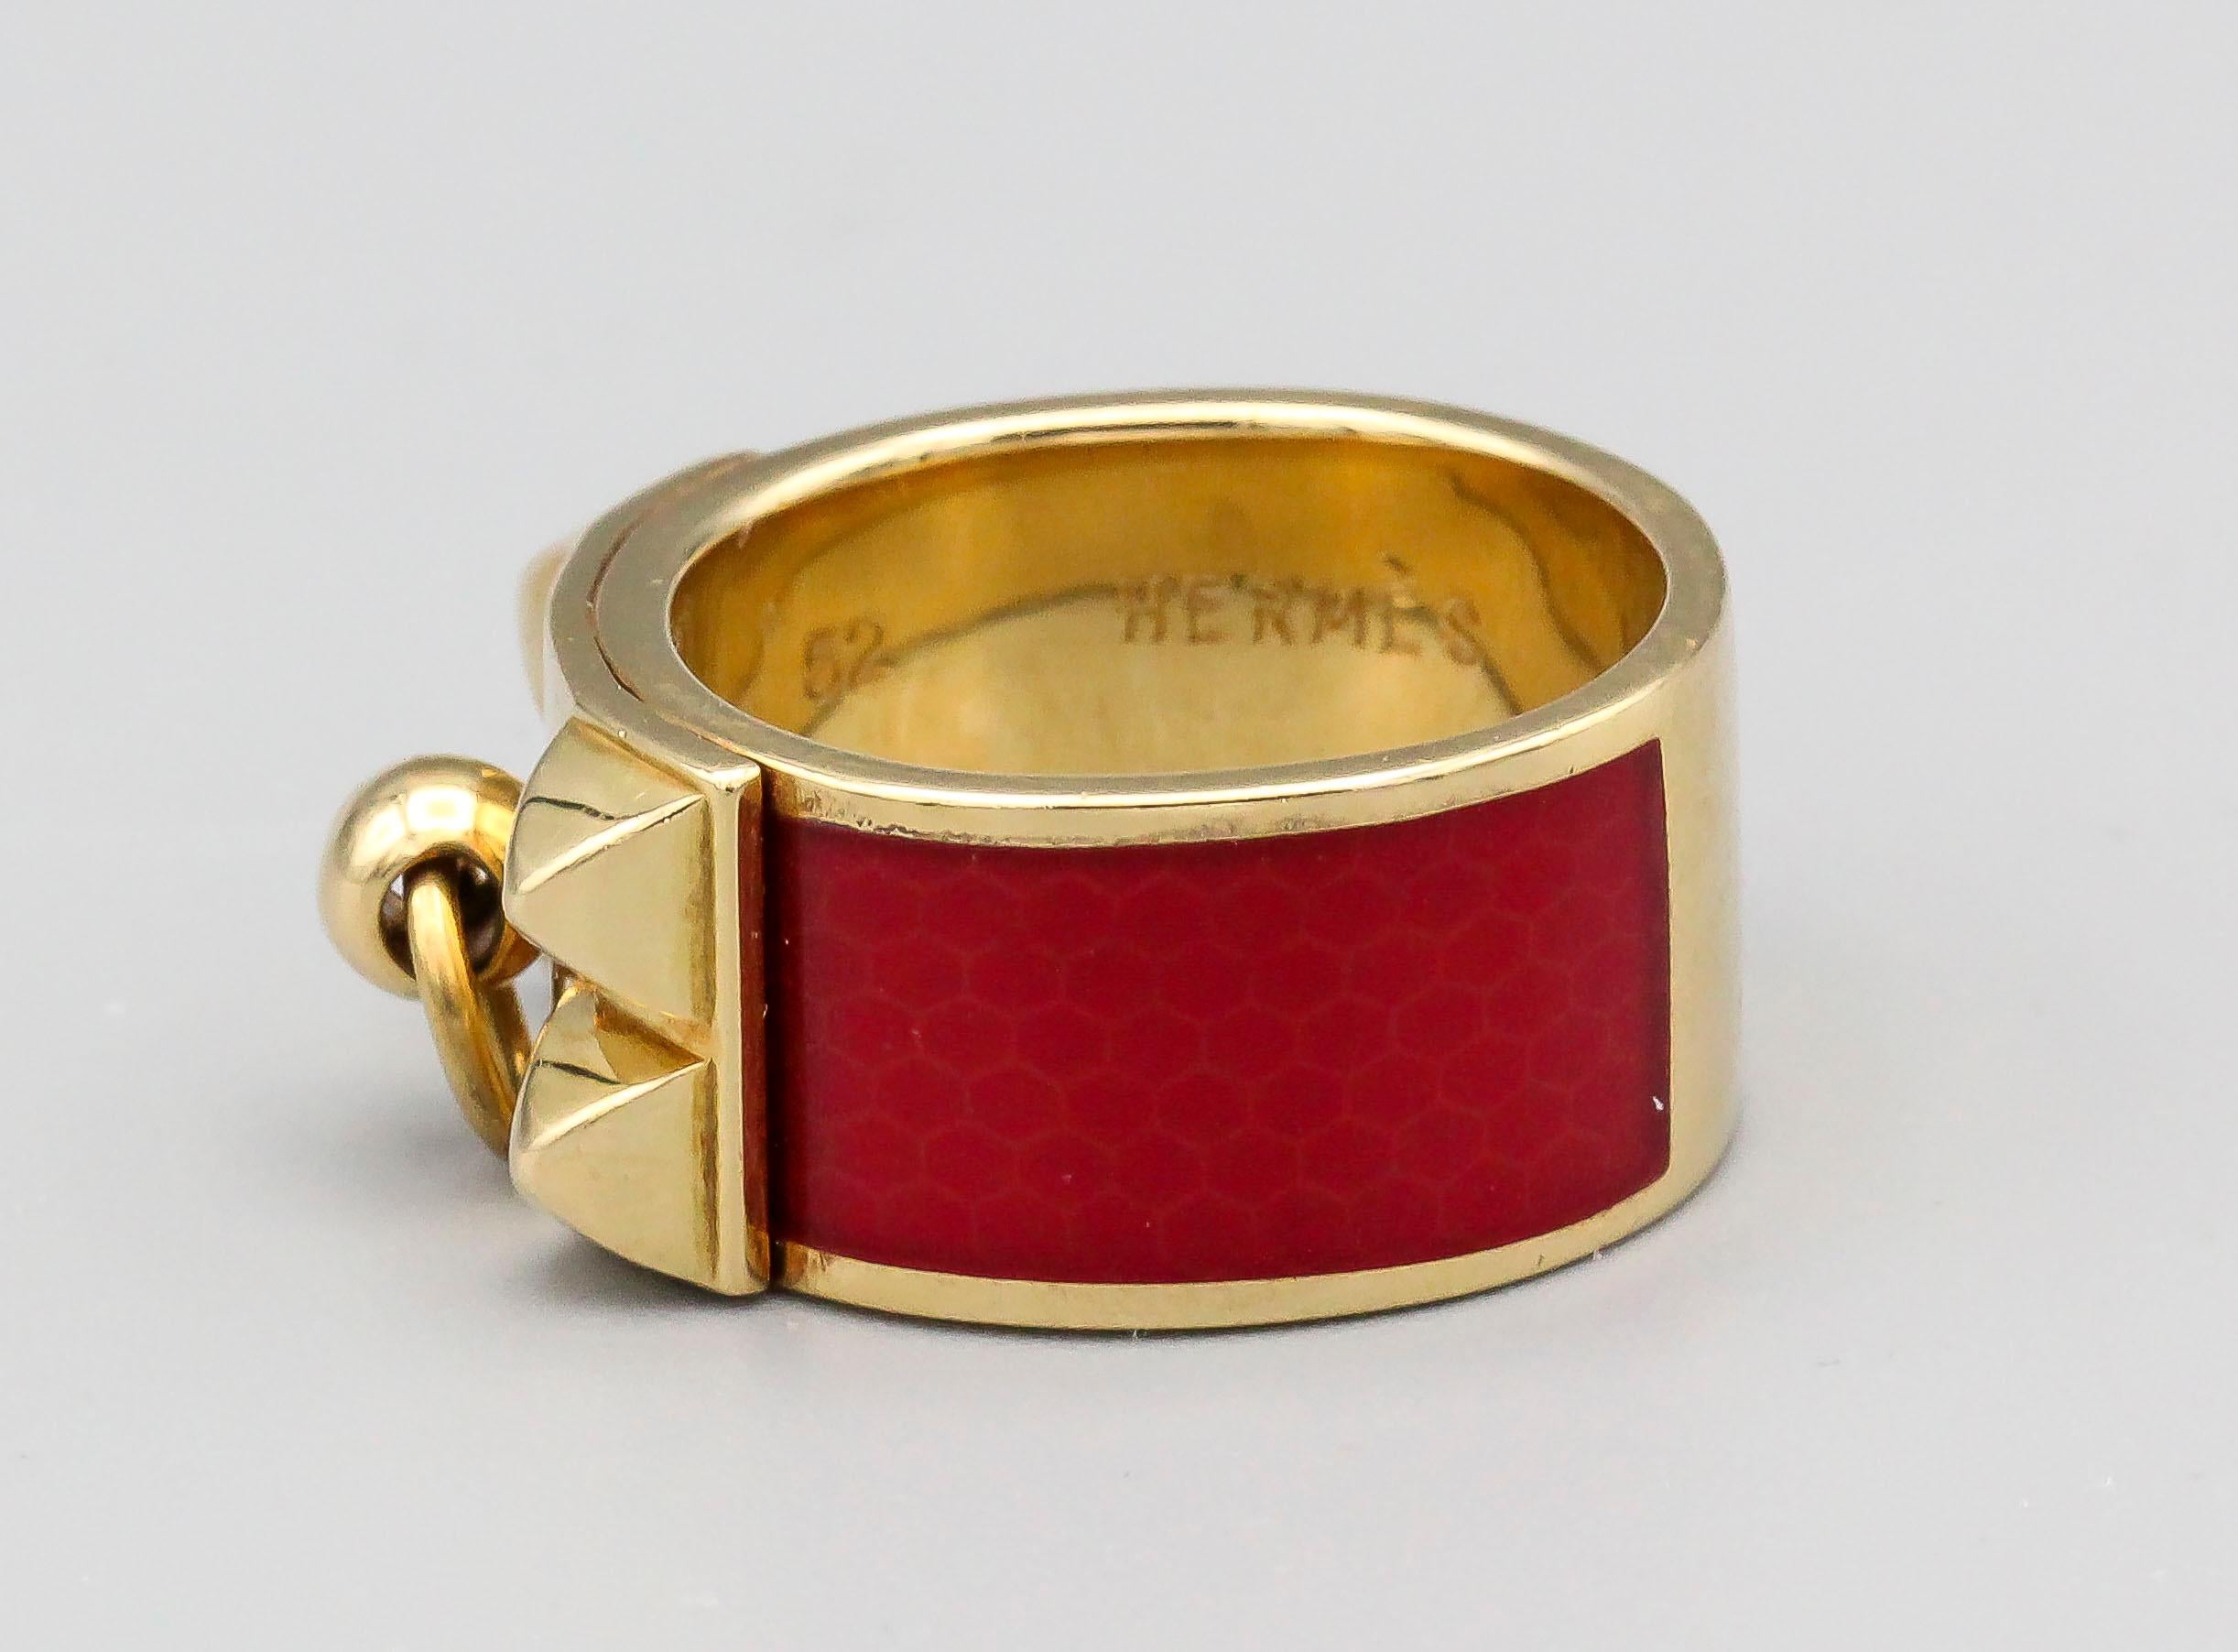 Fine 18k yellow gold ring with rich red enamel by Hermes. From the Collier de Chien collection. Size 52.

Hallmarks: Hermes, 750, reference numbers, maker's mark, French 18K gold assay mark, 52.